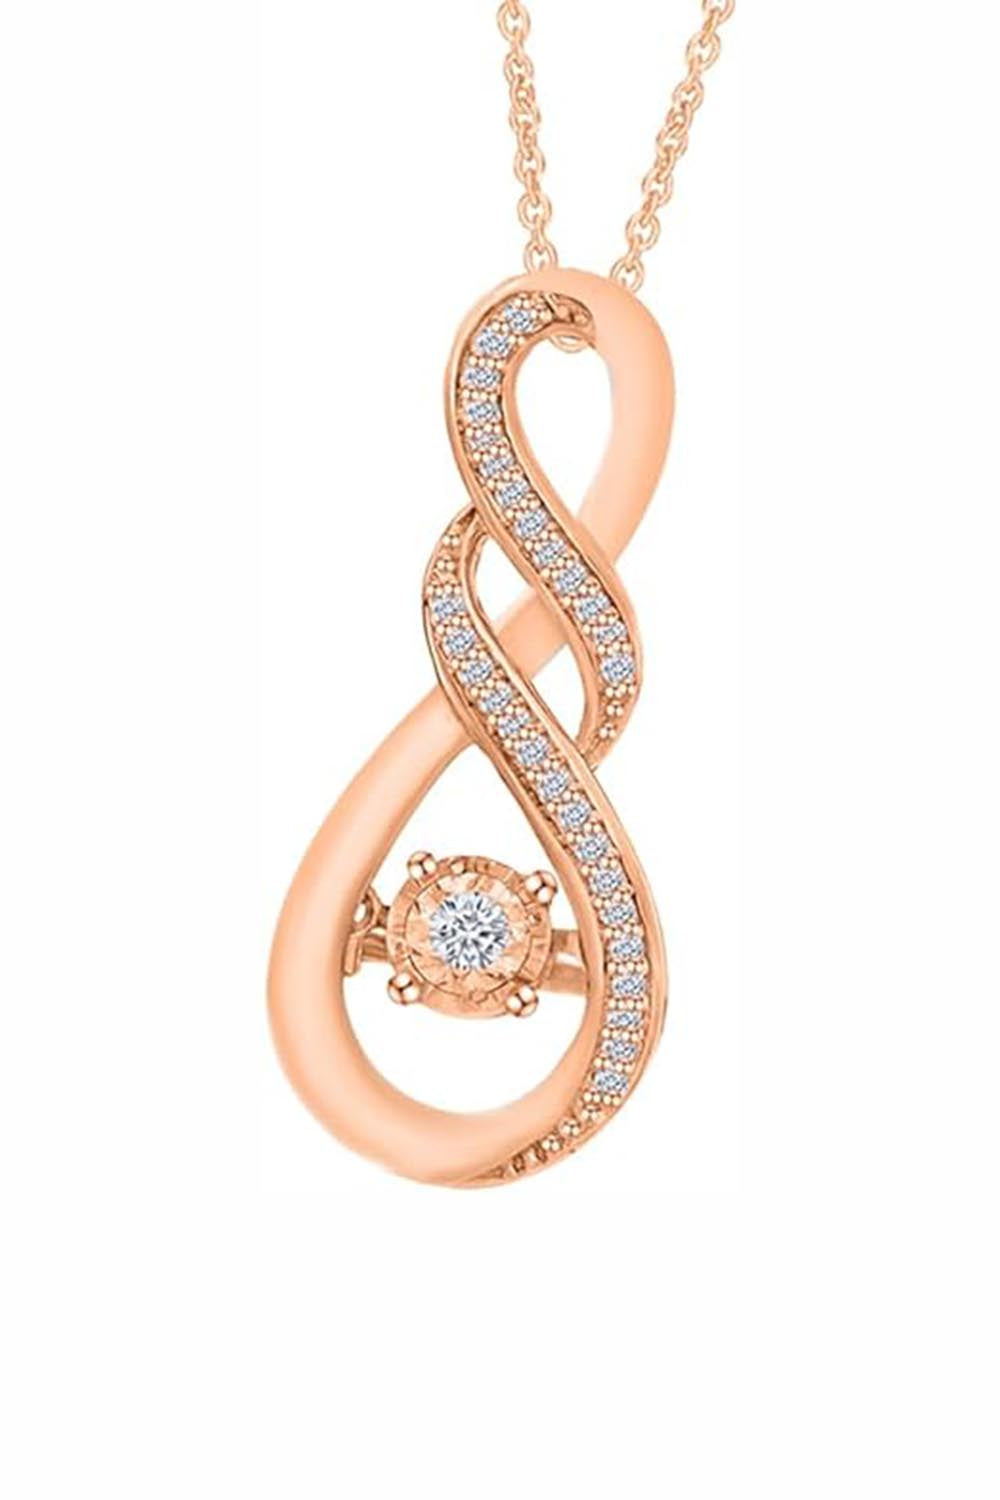 Rose Gold Color Yaathi Double Infinity Pendant Necklace, Jewellery